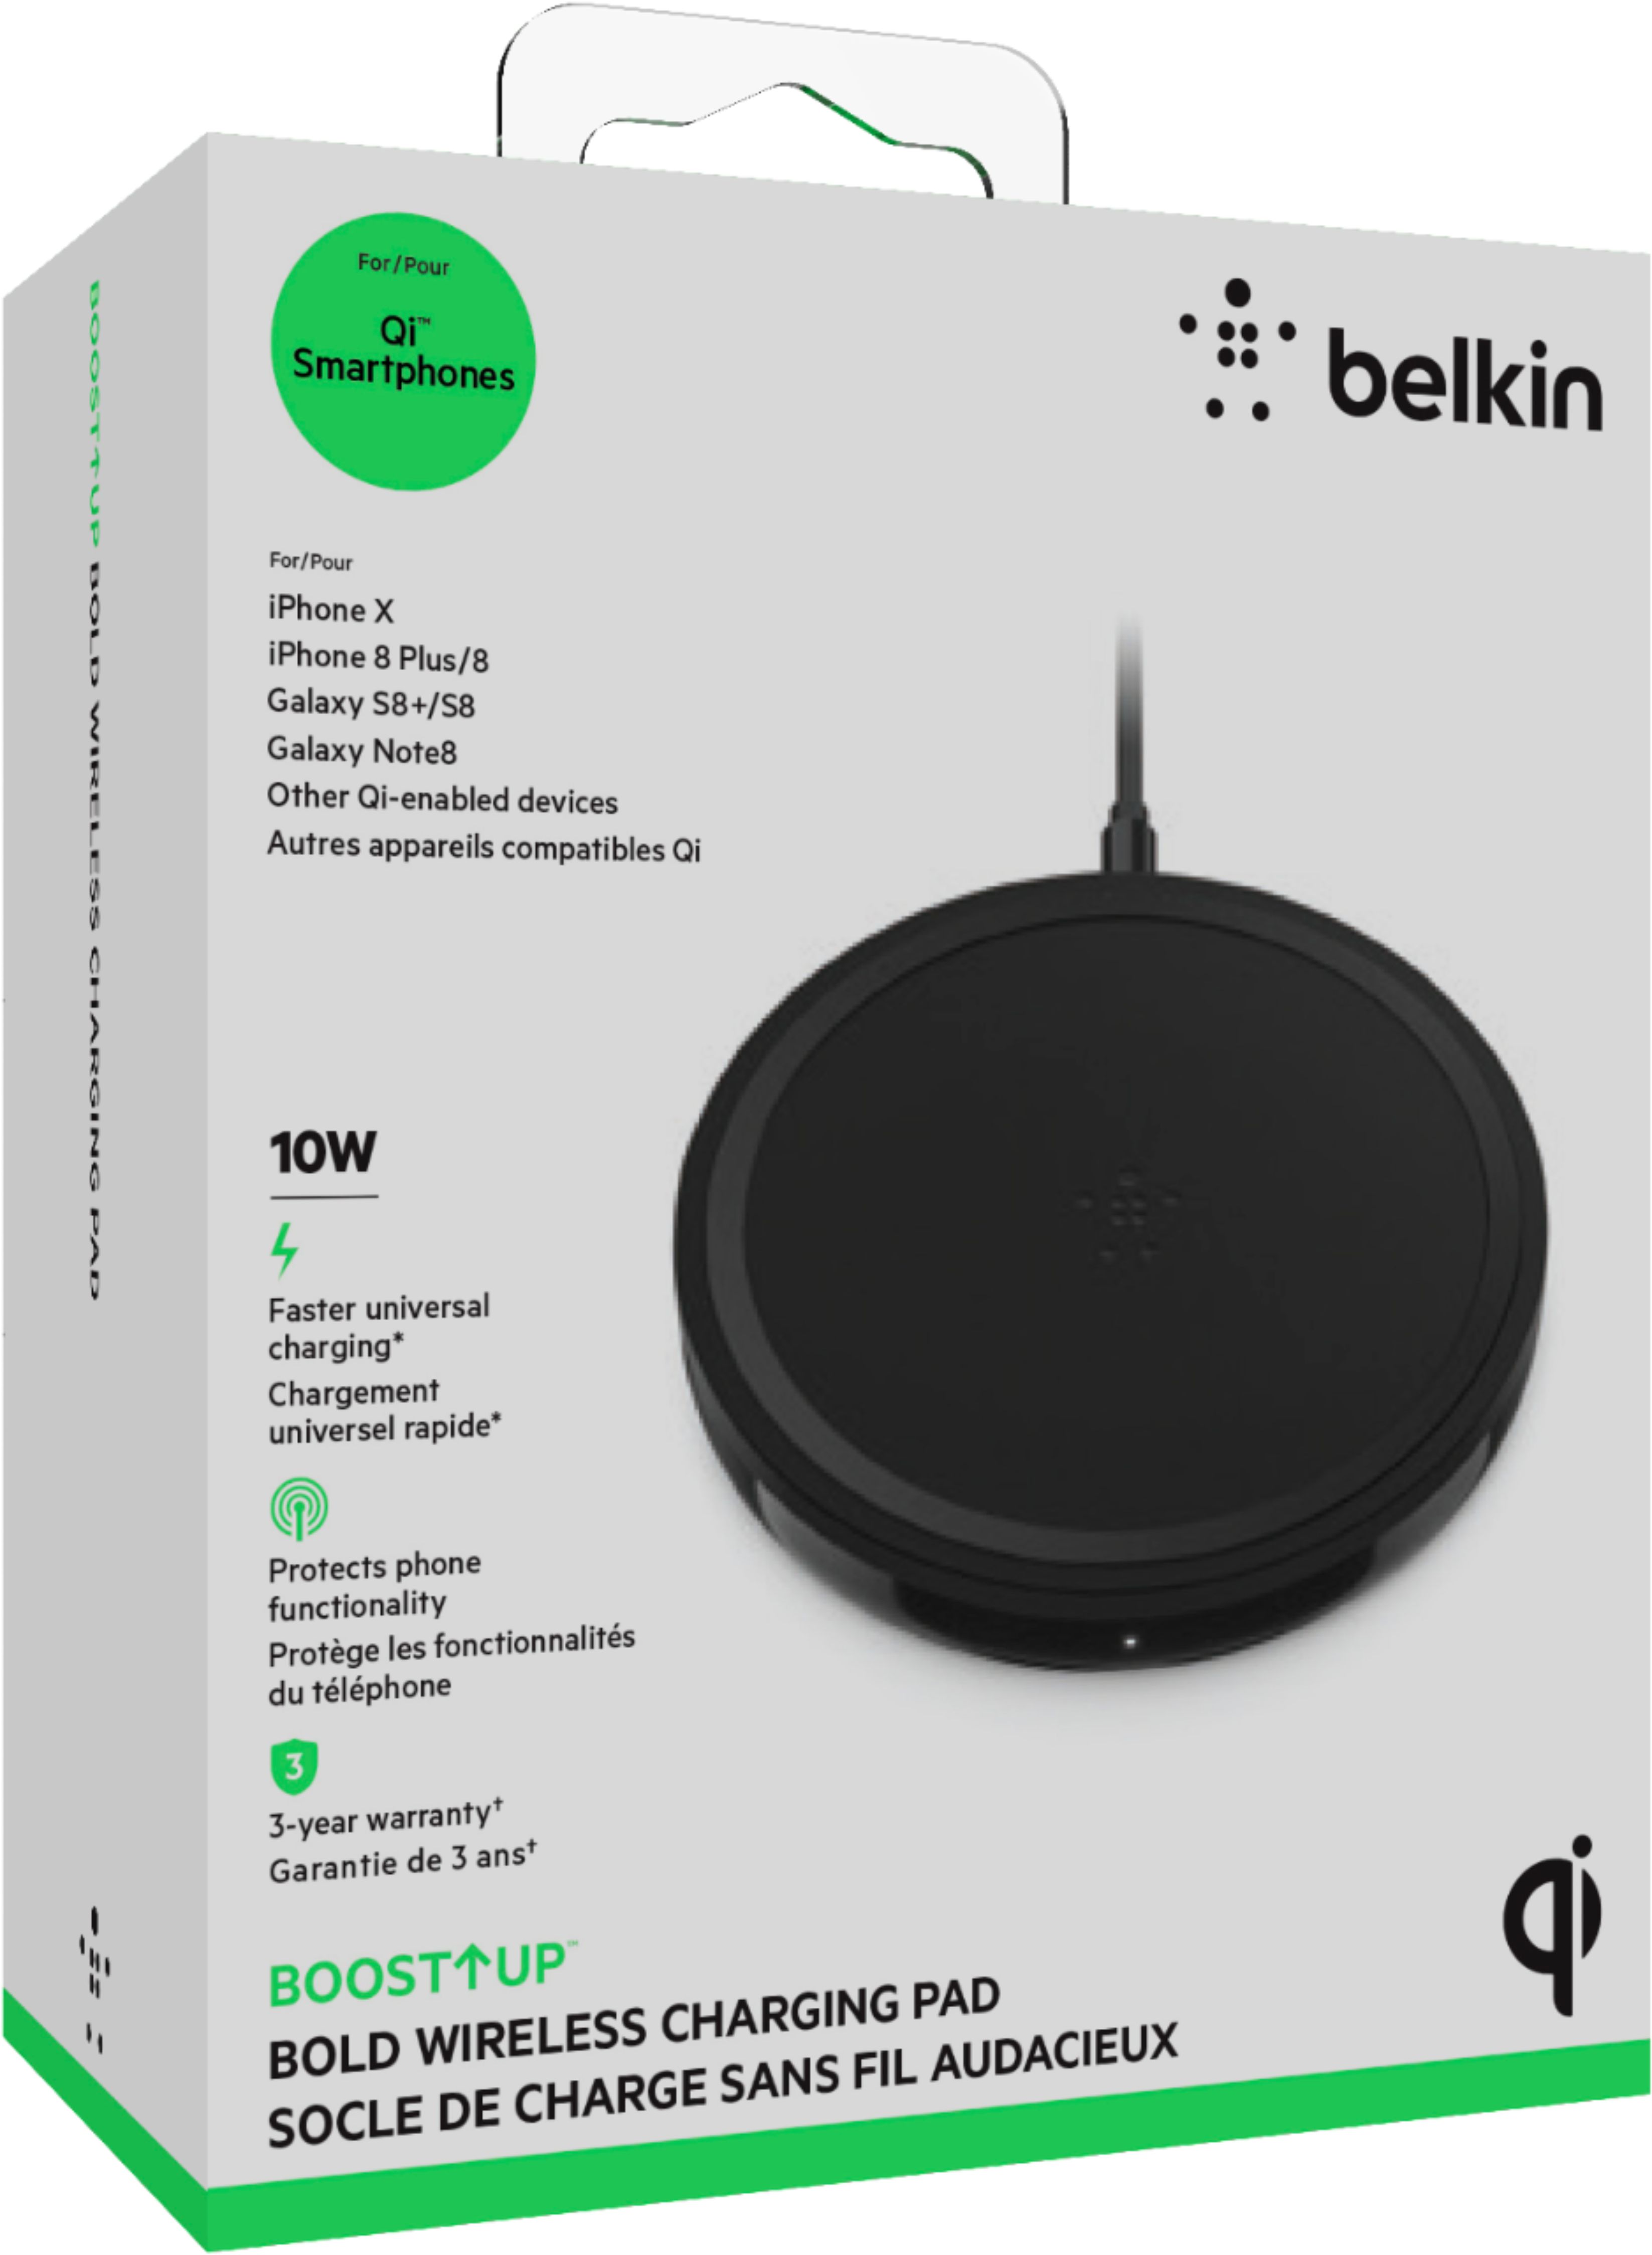 Belkin Boost Up 10w Qi Certified Wireless Charging Pad For Iphone Android Midnight Black